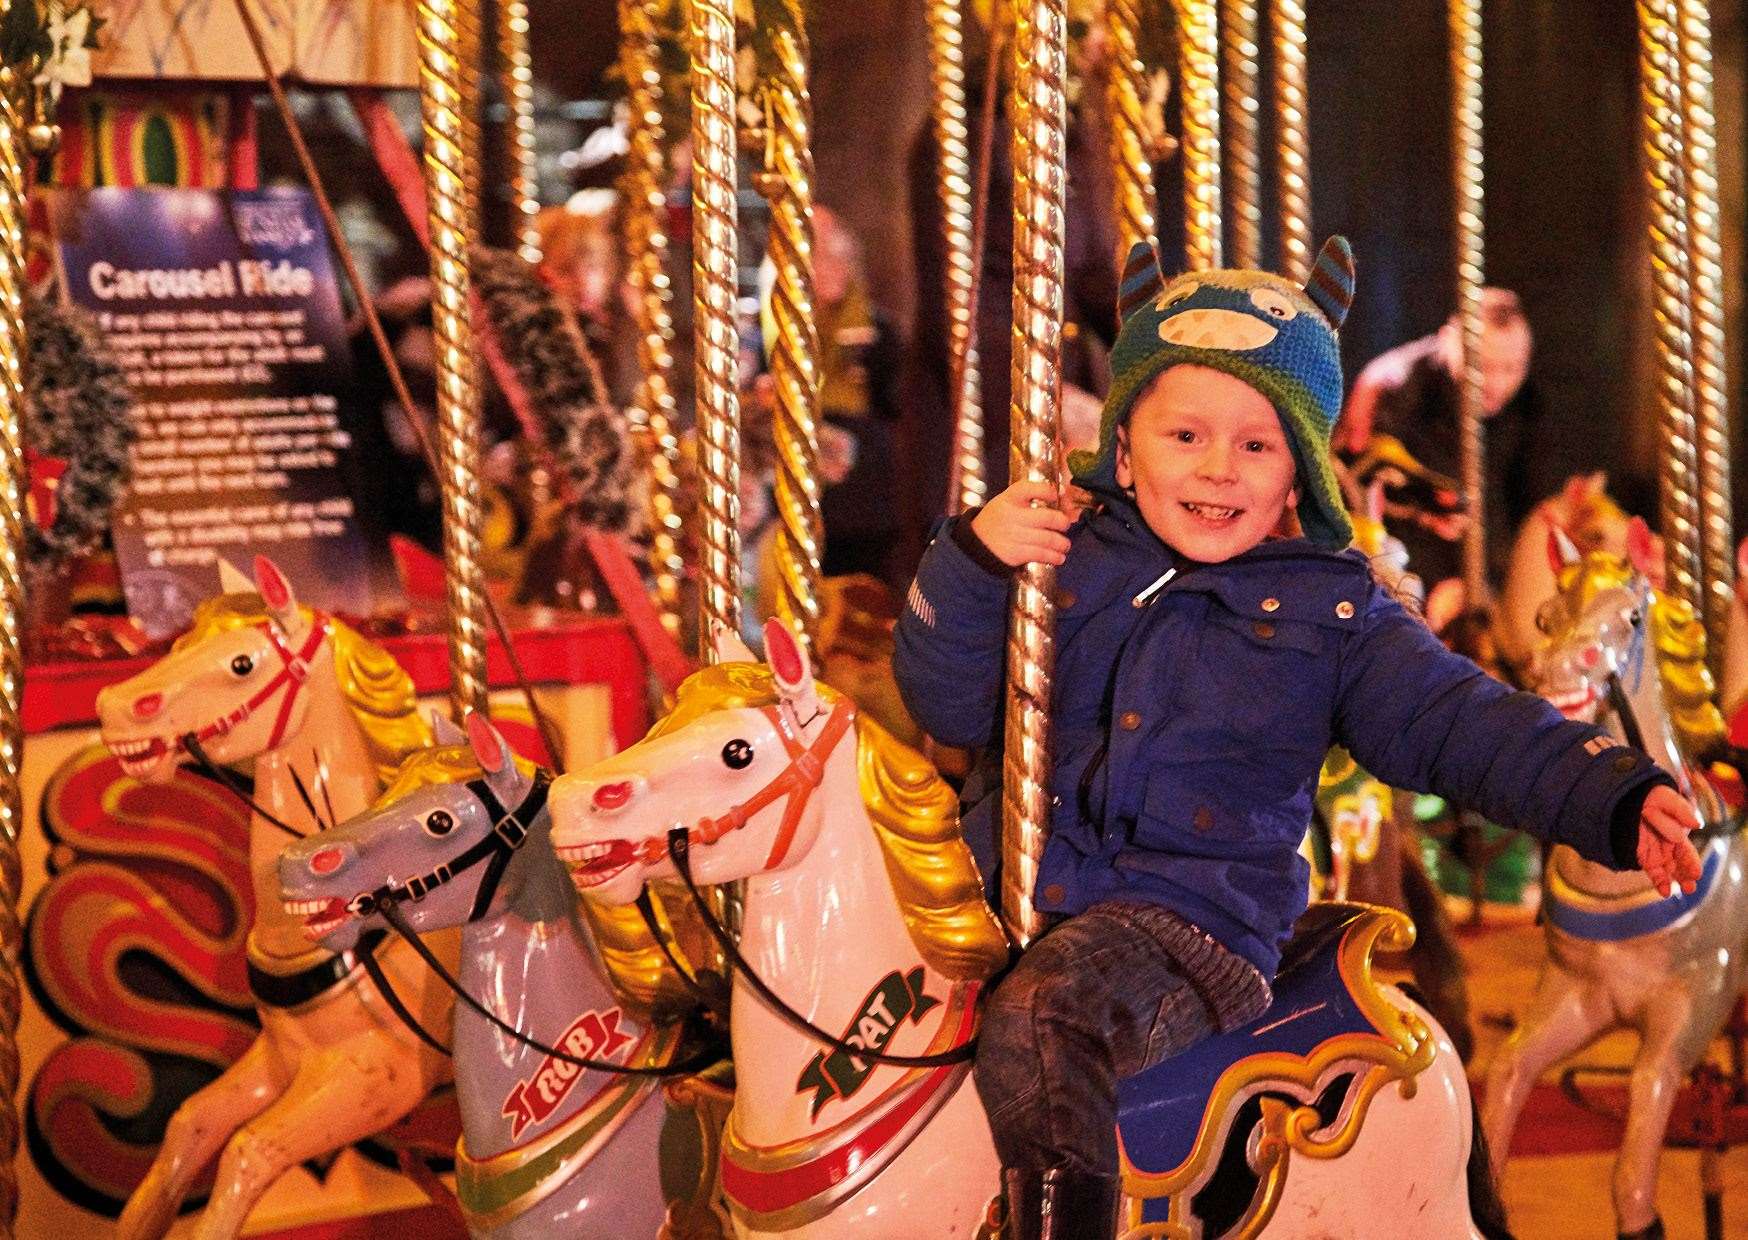 Fairground rides at this year's event are currently under review because of coronavirus